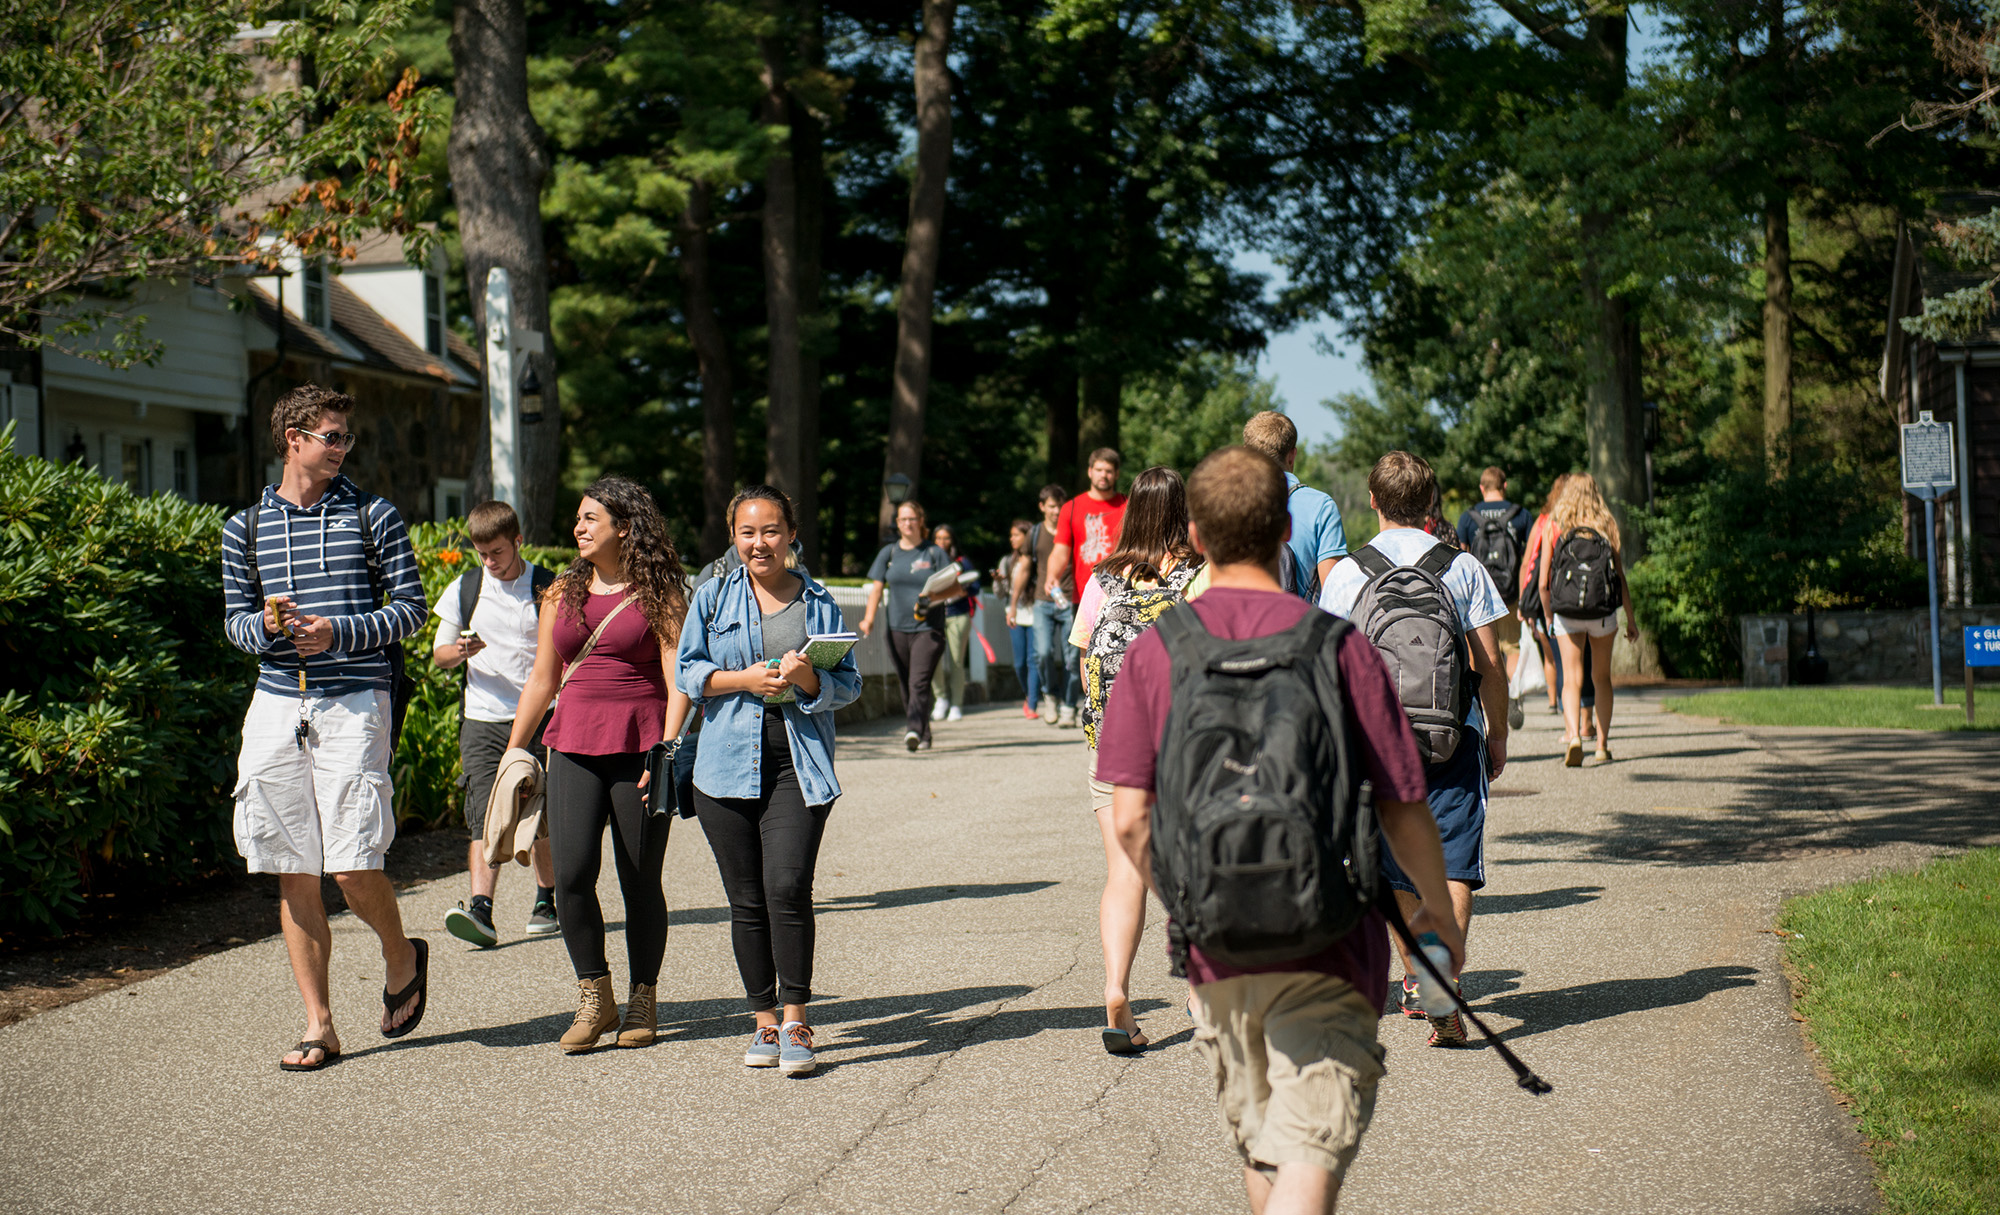 Students walking on campus between class times on a sunny day